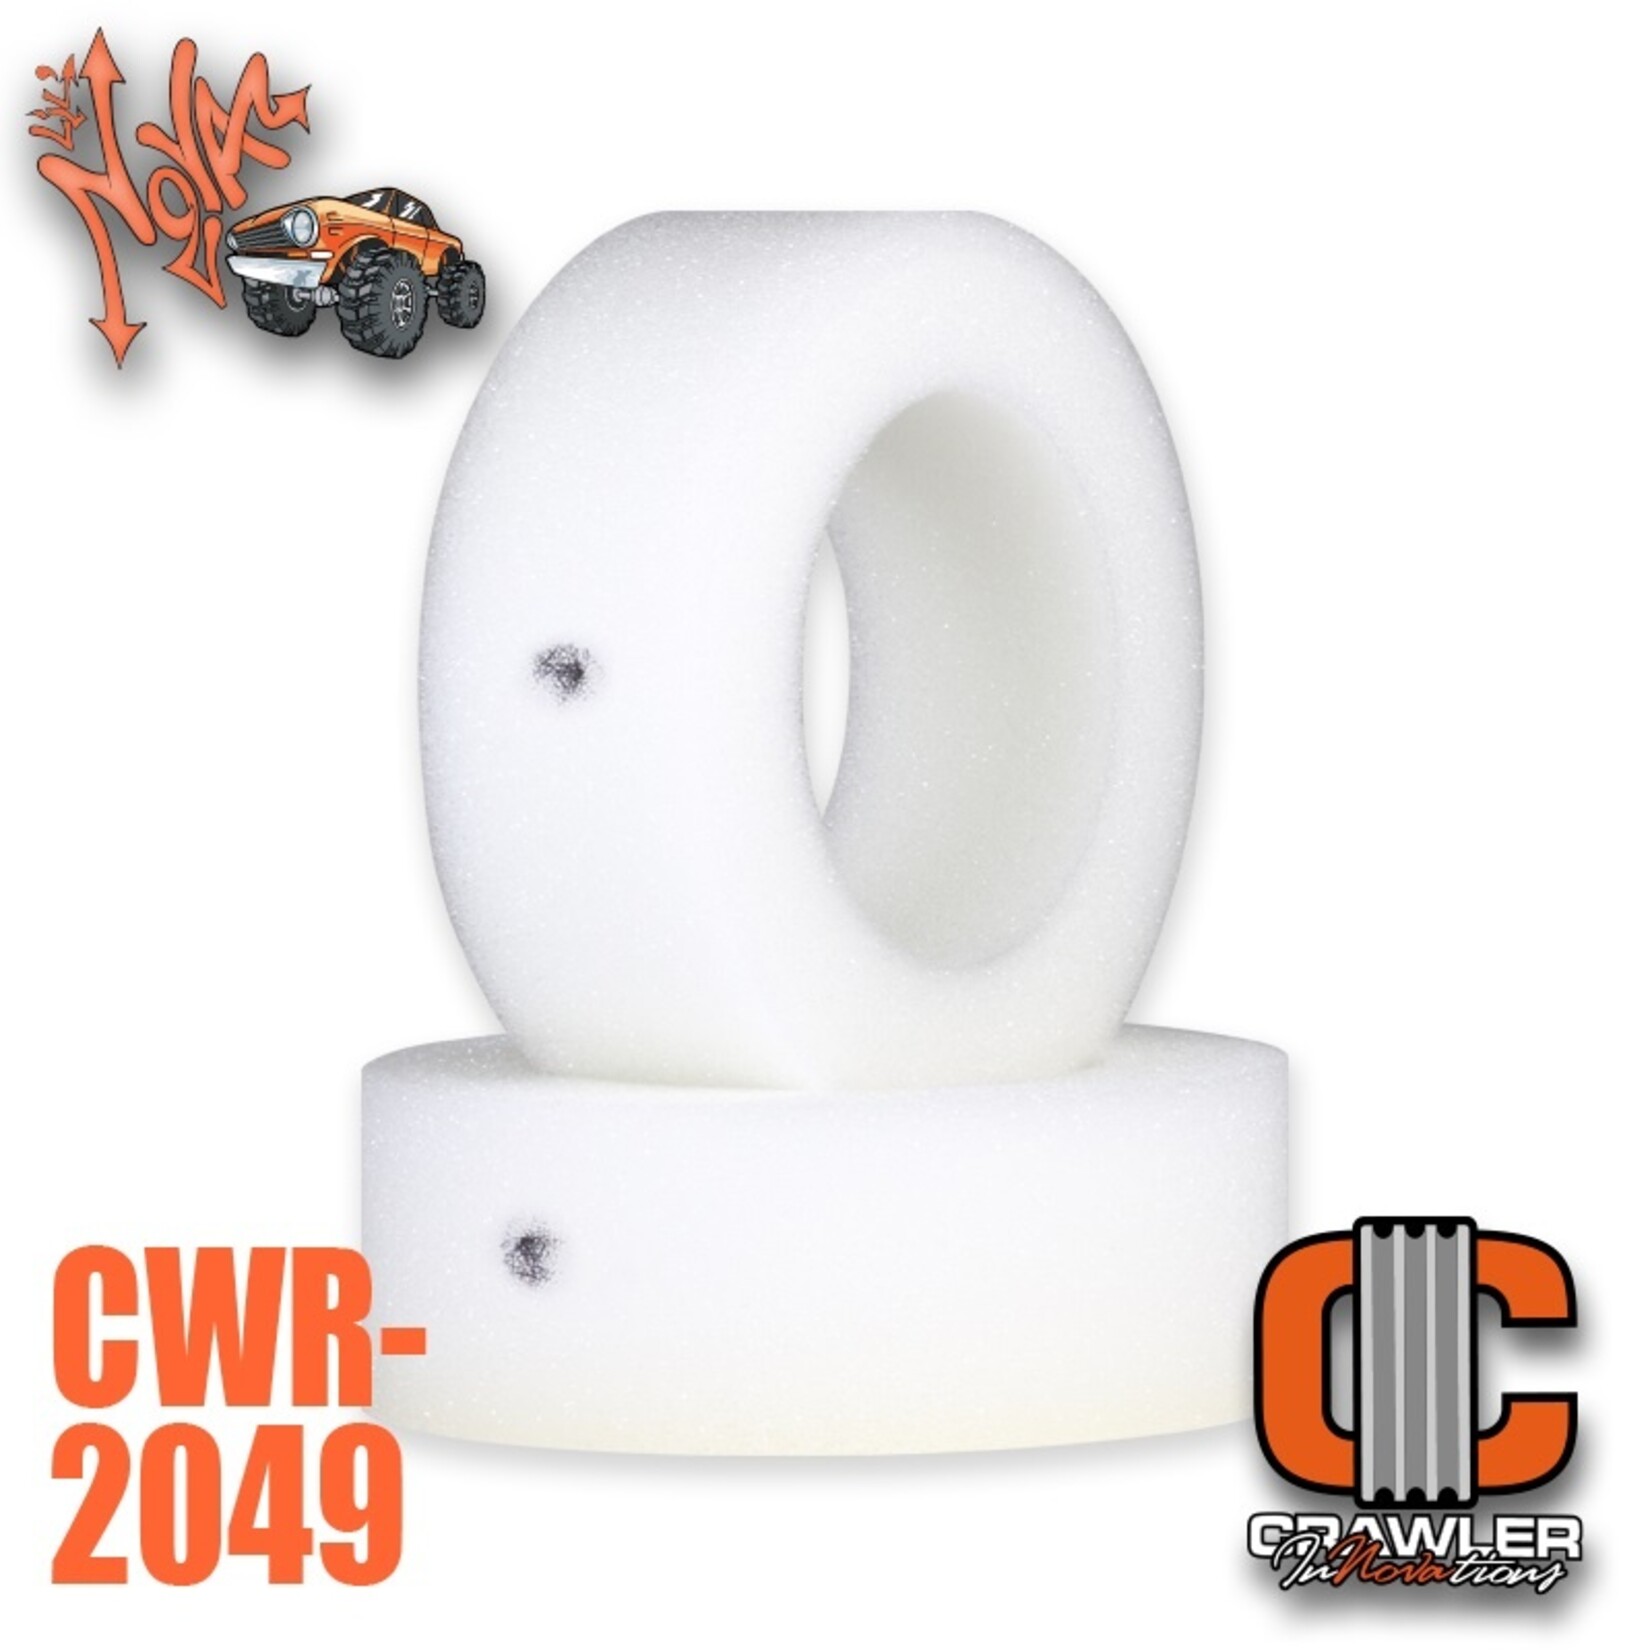 Crawler Innovations Crawler Innovations Lil' Nova Dual Stage Firm Outer 4.25, 4.50, & 4.75 w/Tuning Rings #CWR-2049